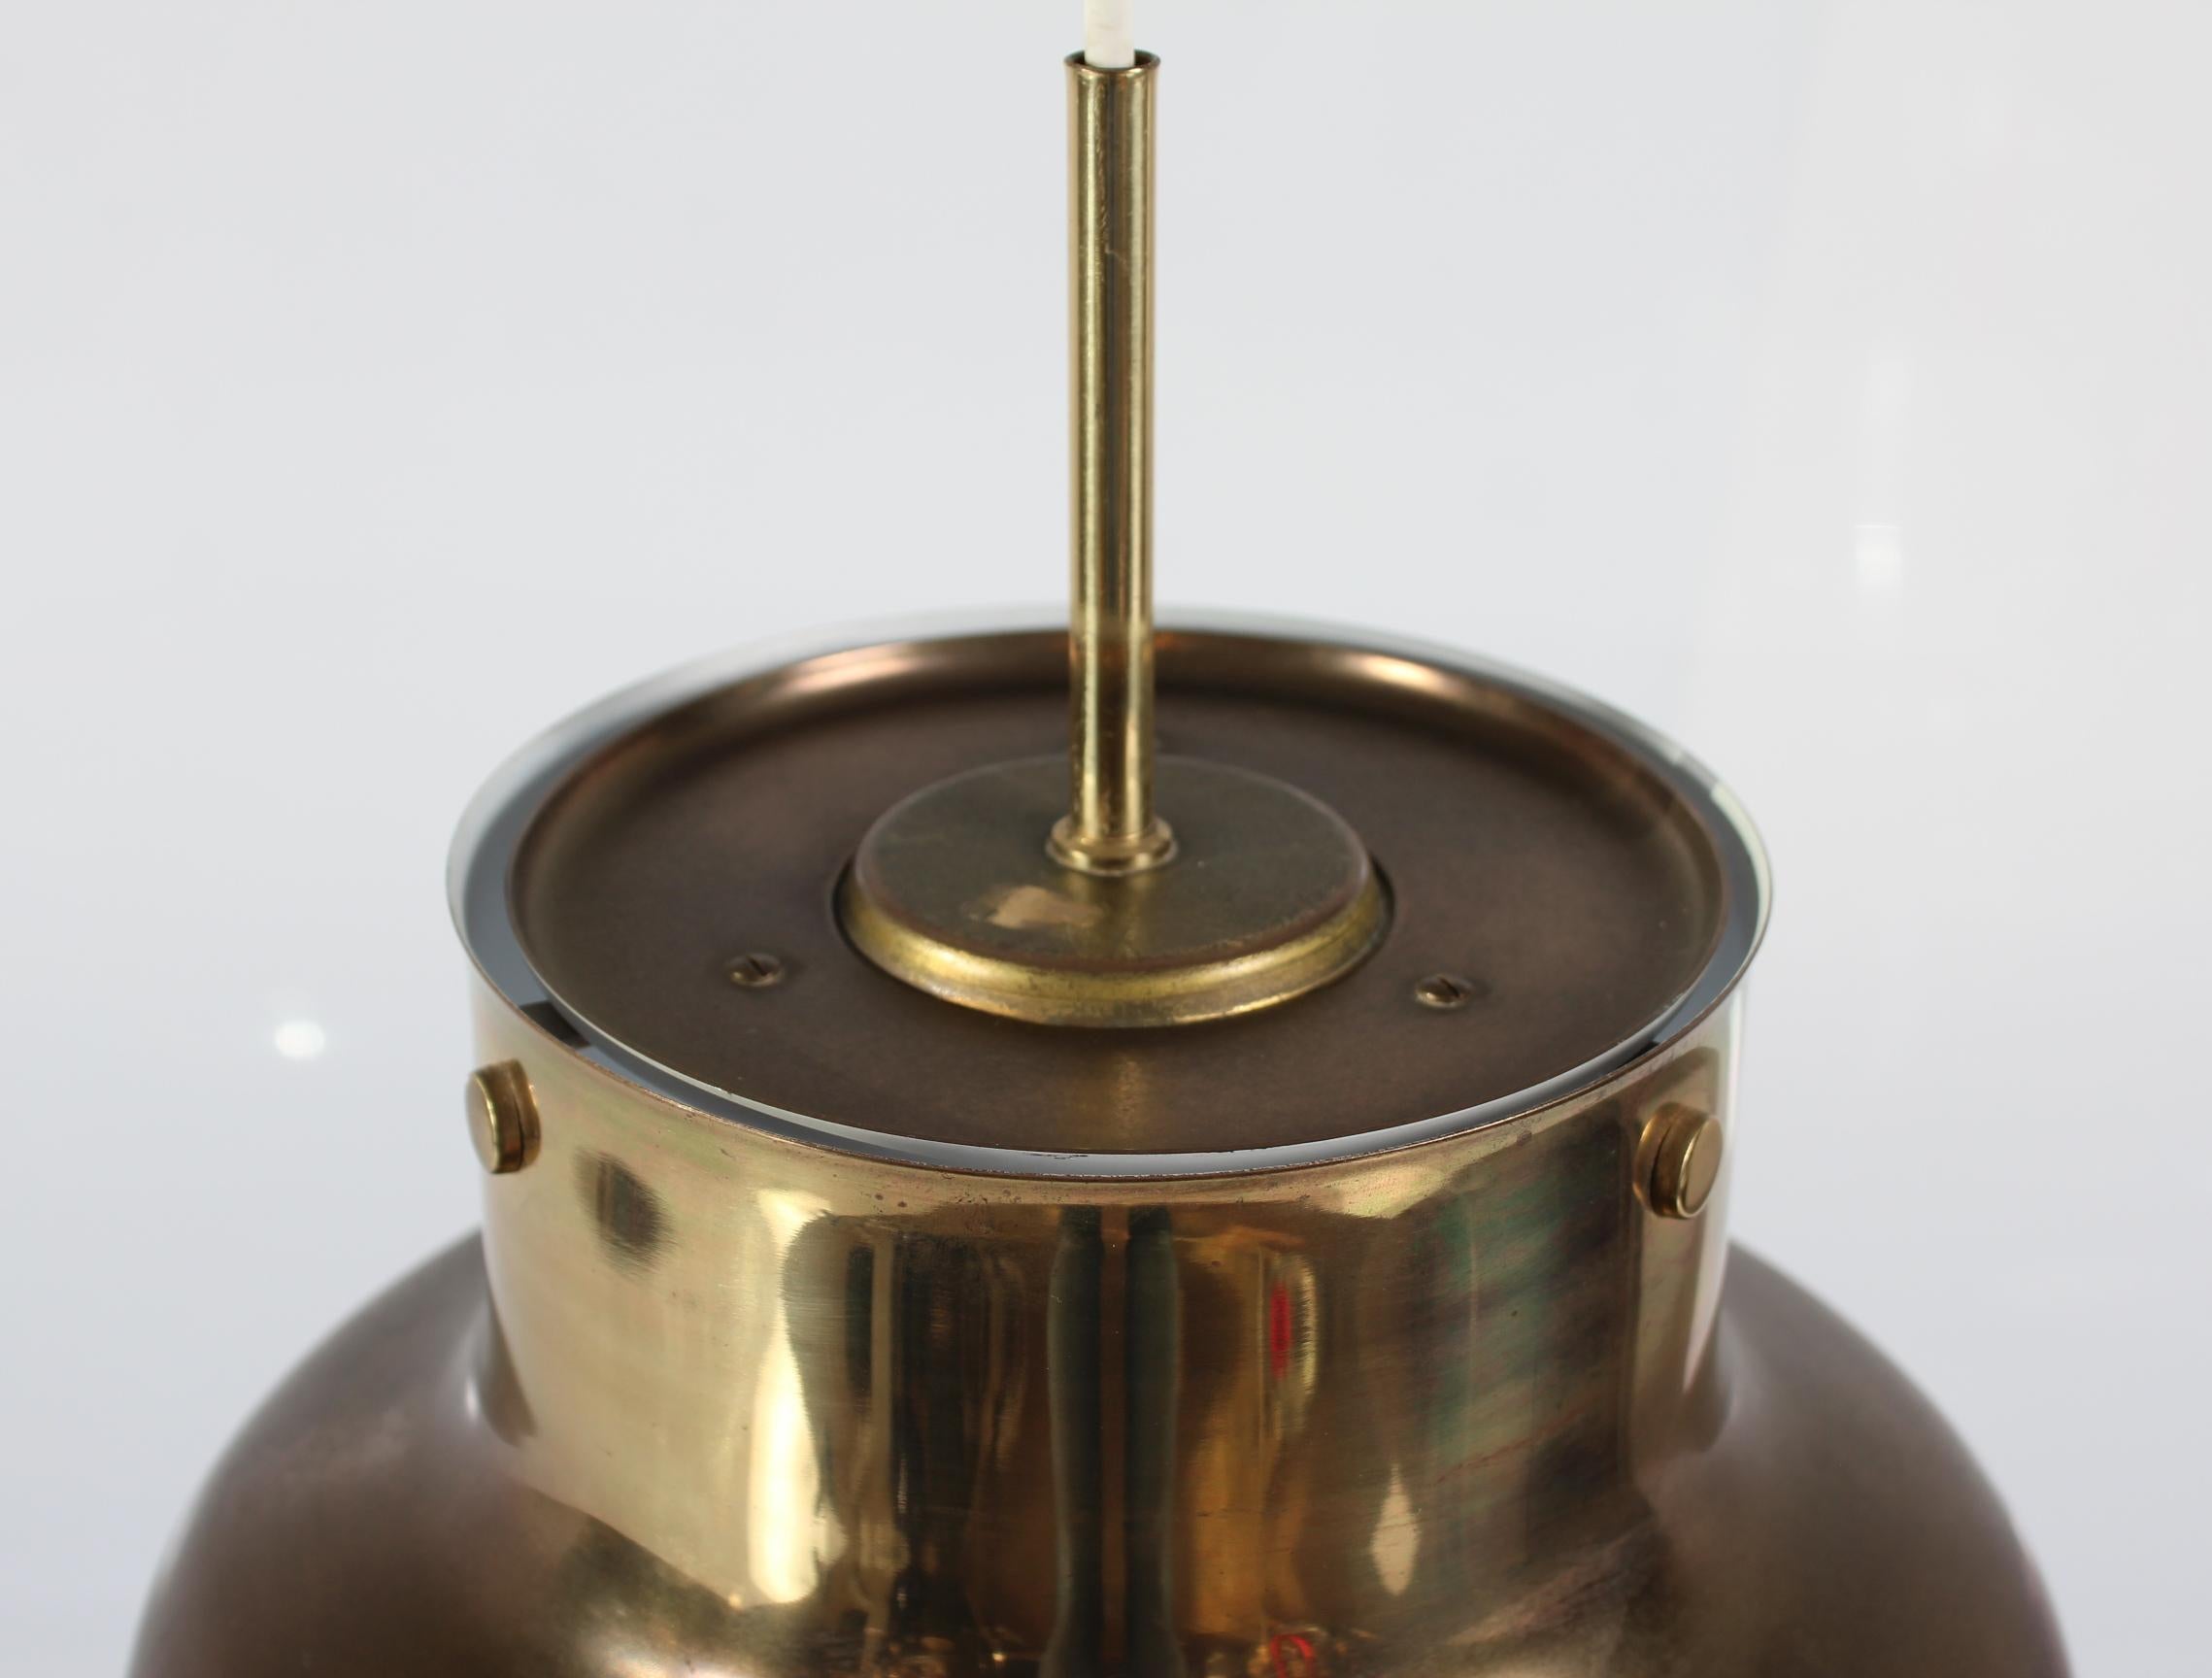 Original Anders Pehrsson Bumling ceiling lamp made by the Swedish lamp manufacturer Ateljé Lyktan in the 1970s.

The lamp is made of patinated brass and remains in good condition with full function.
This item is without plastic grill inside the